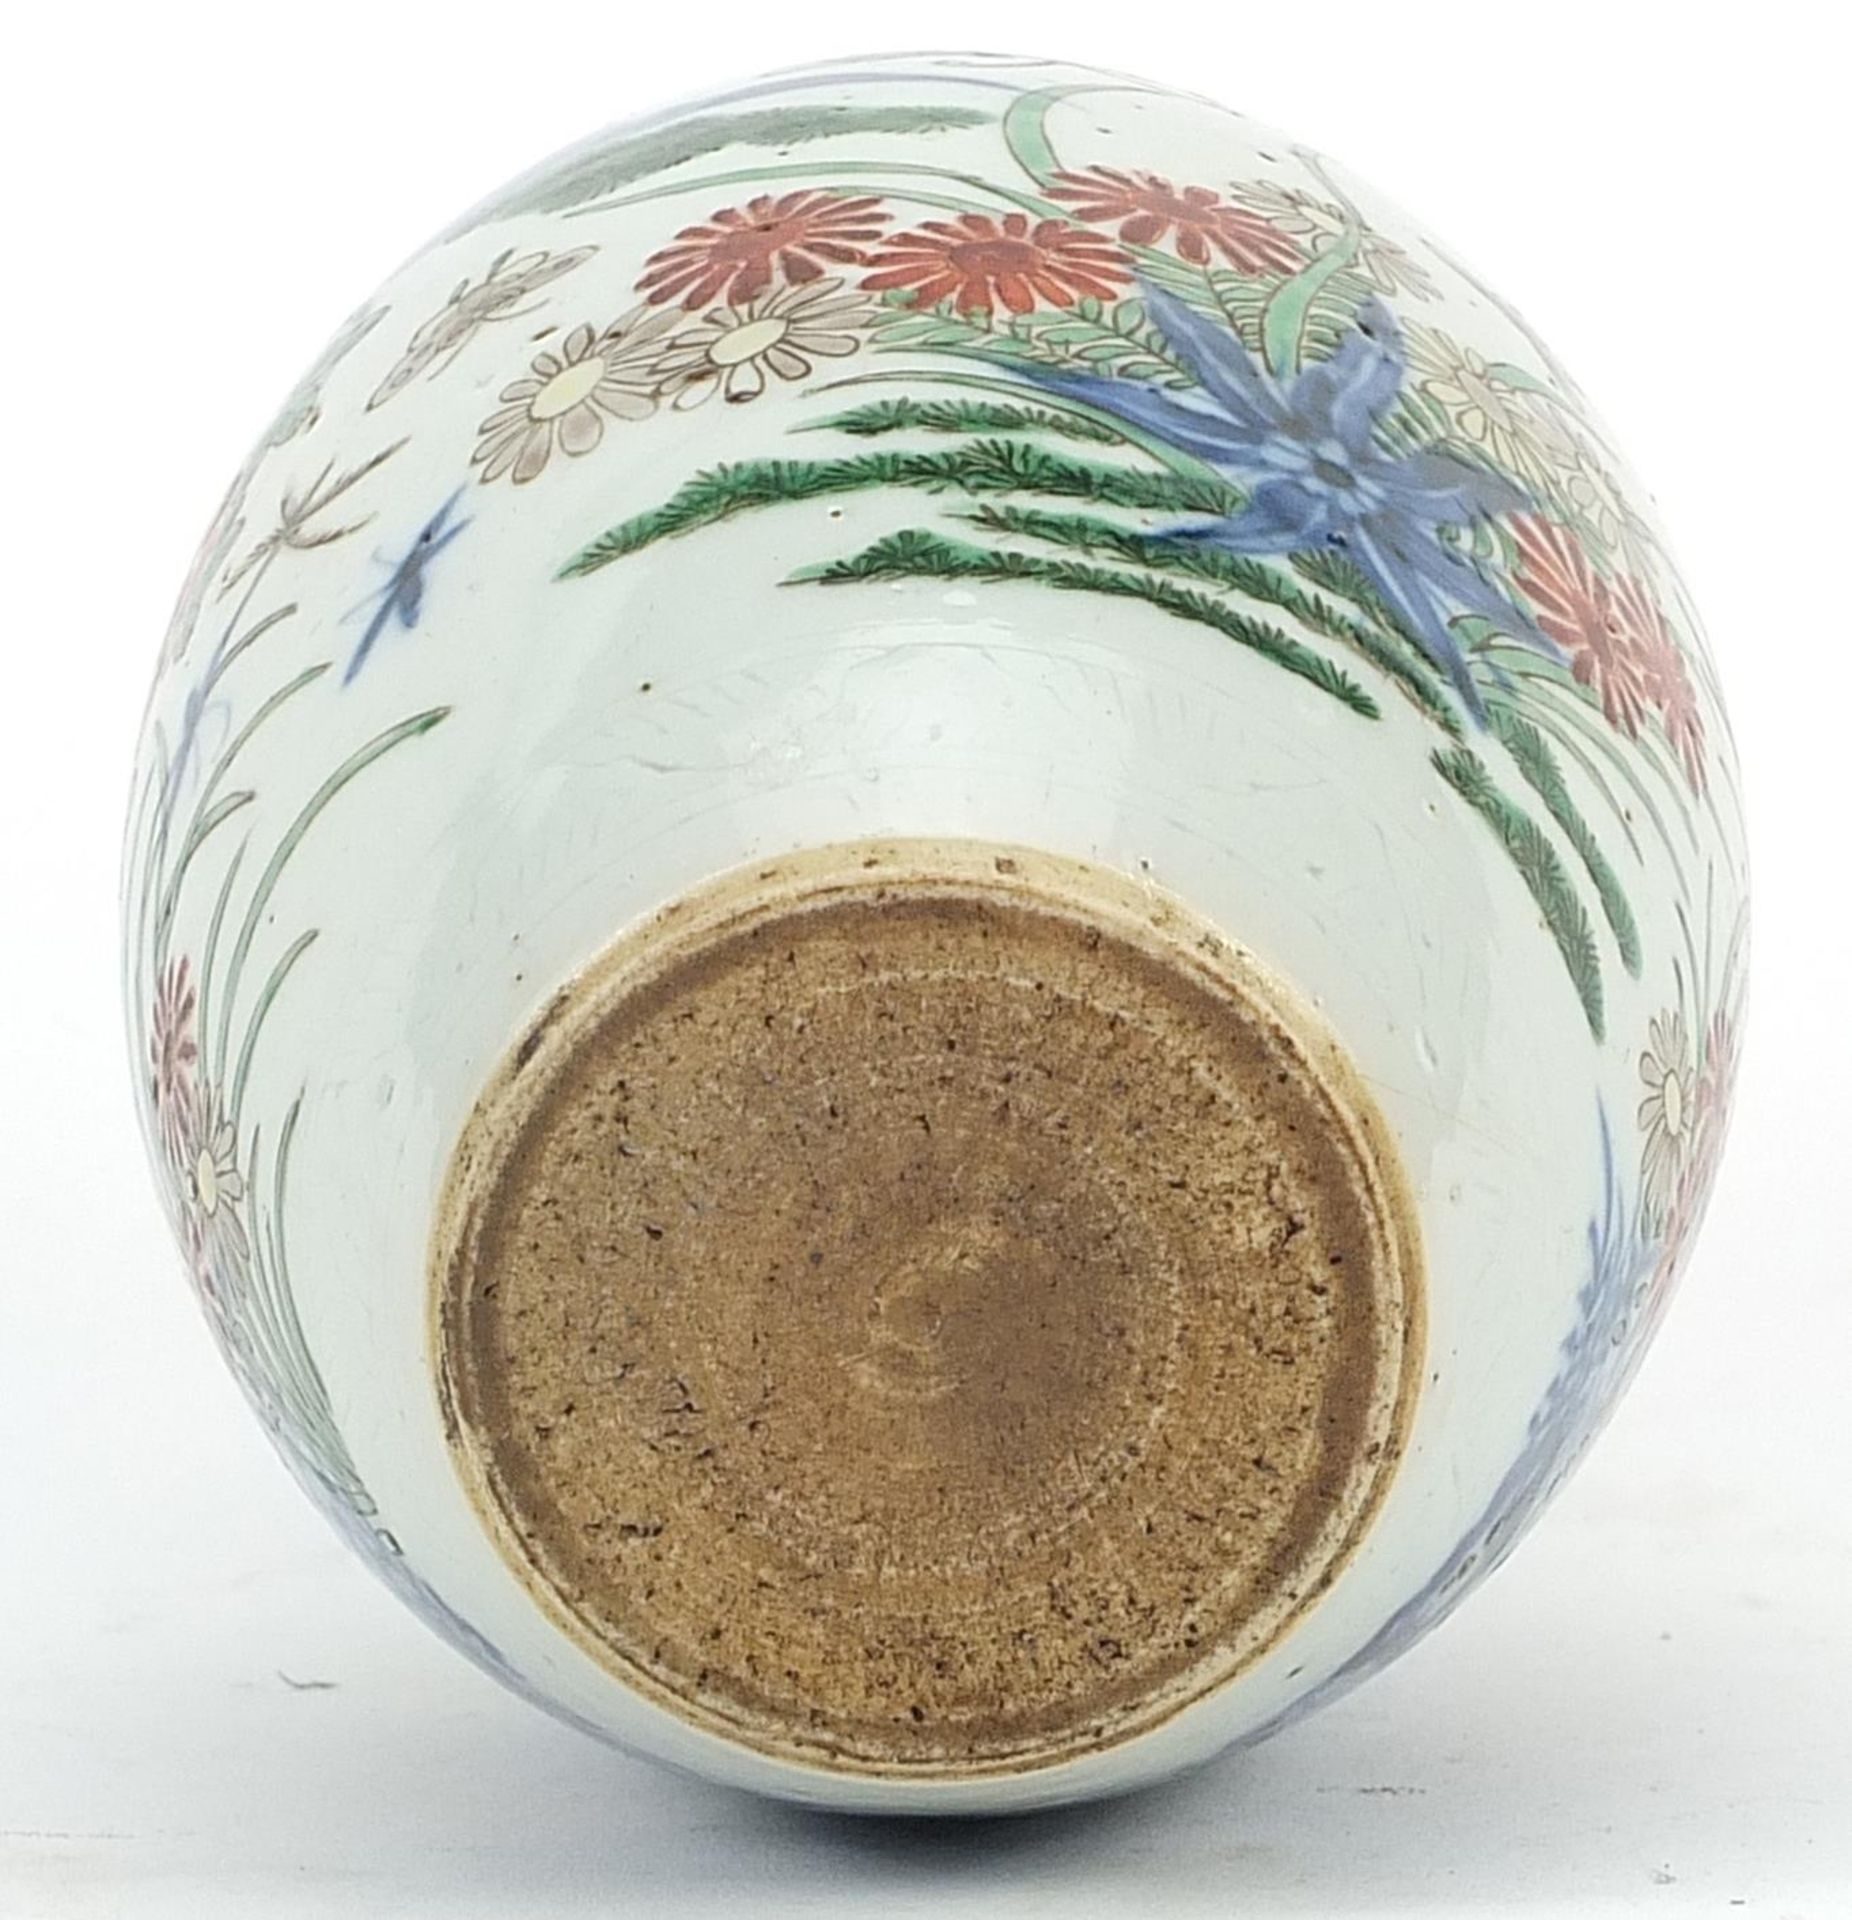 Chinese wucai porcelain vase hand painted with butterflies amongst flowers, 15cm high - Image 3 of 3